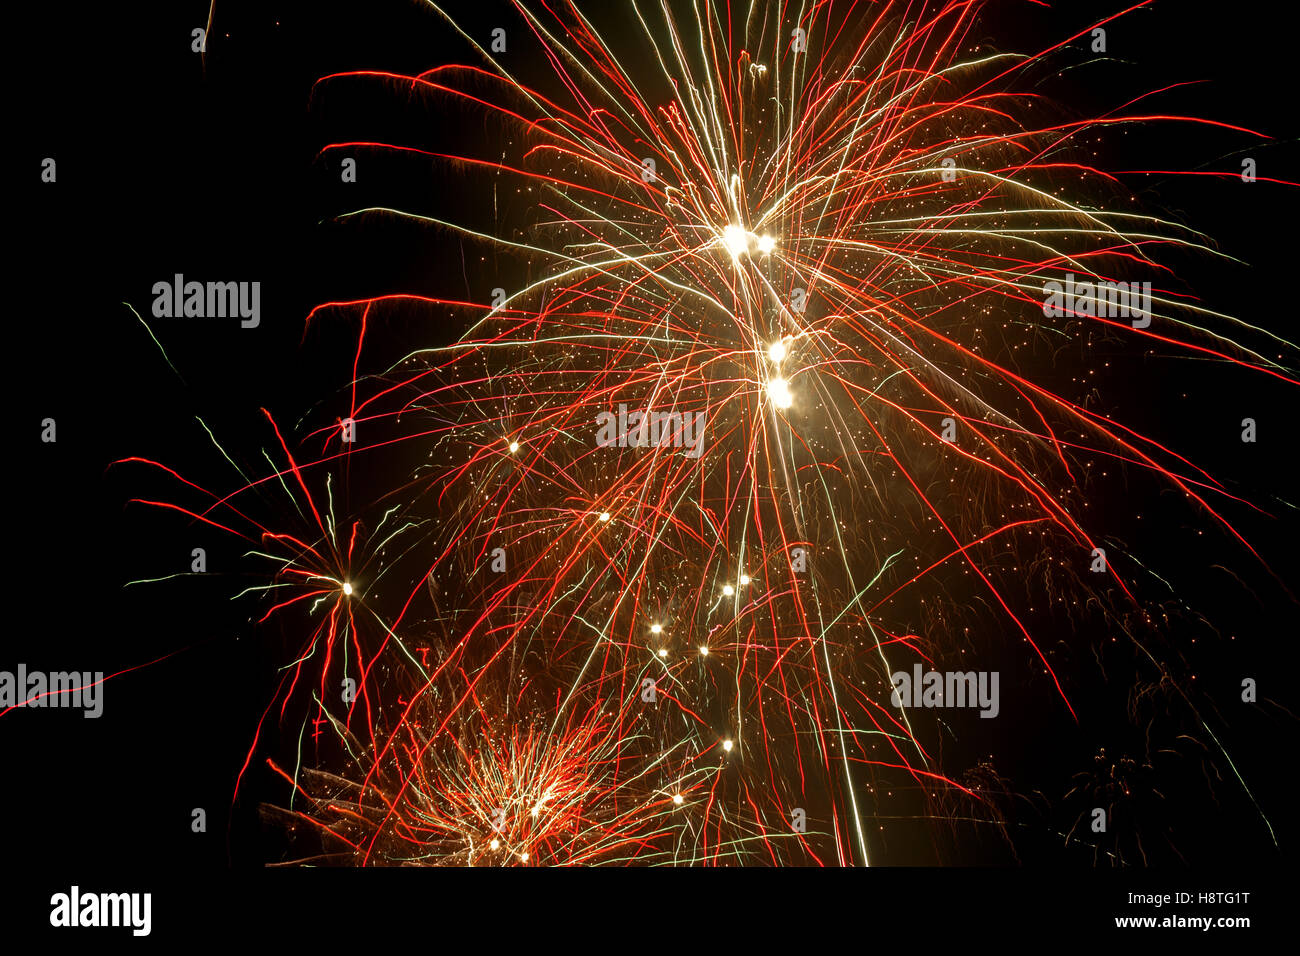 Colorful fireworks in the night sky made the party became more festive. Stock Photo